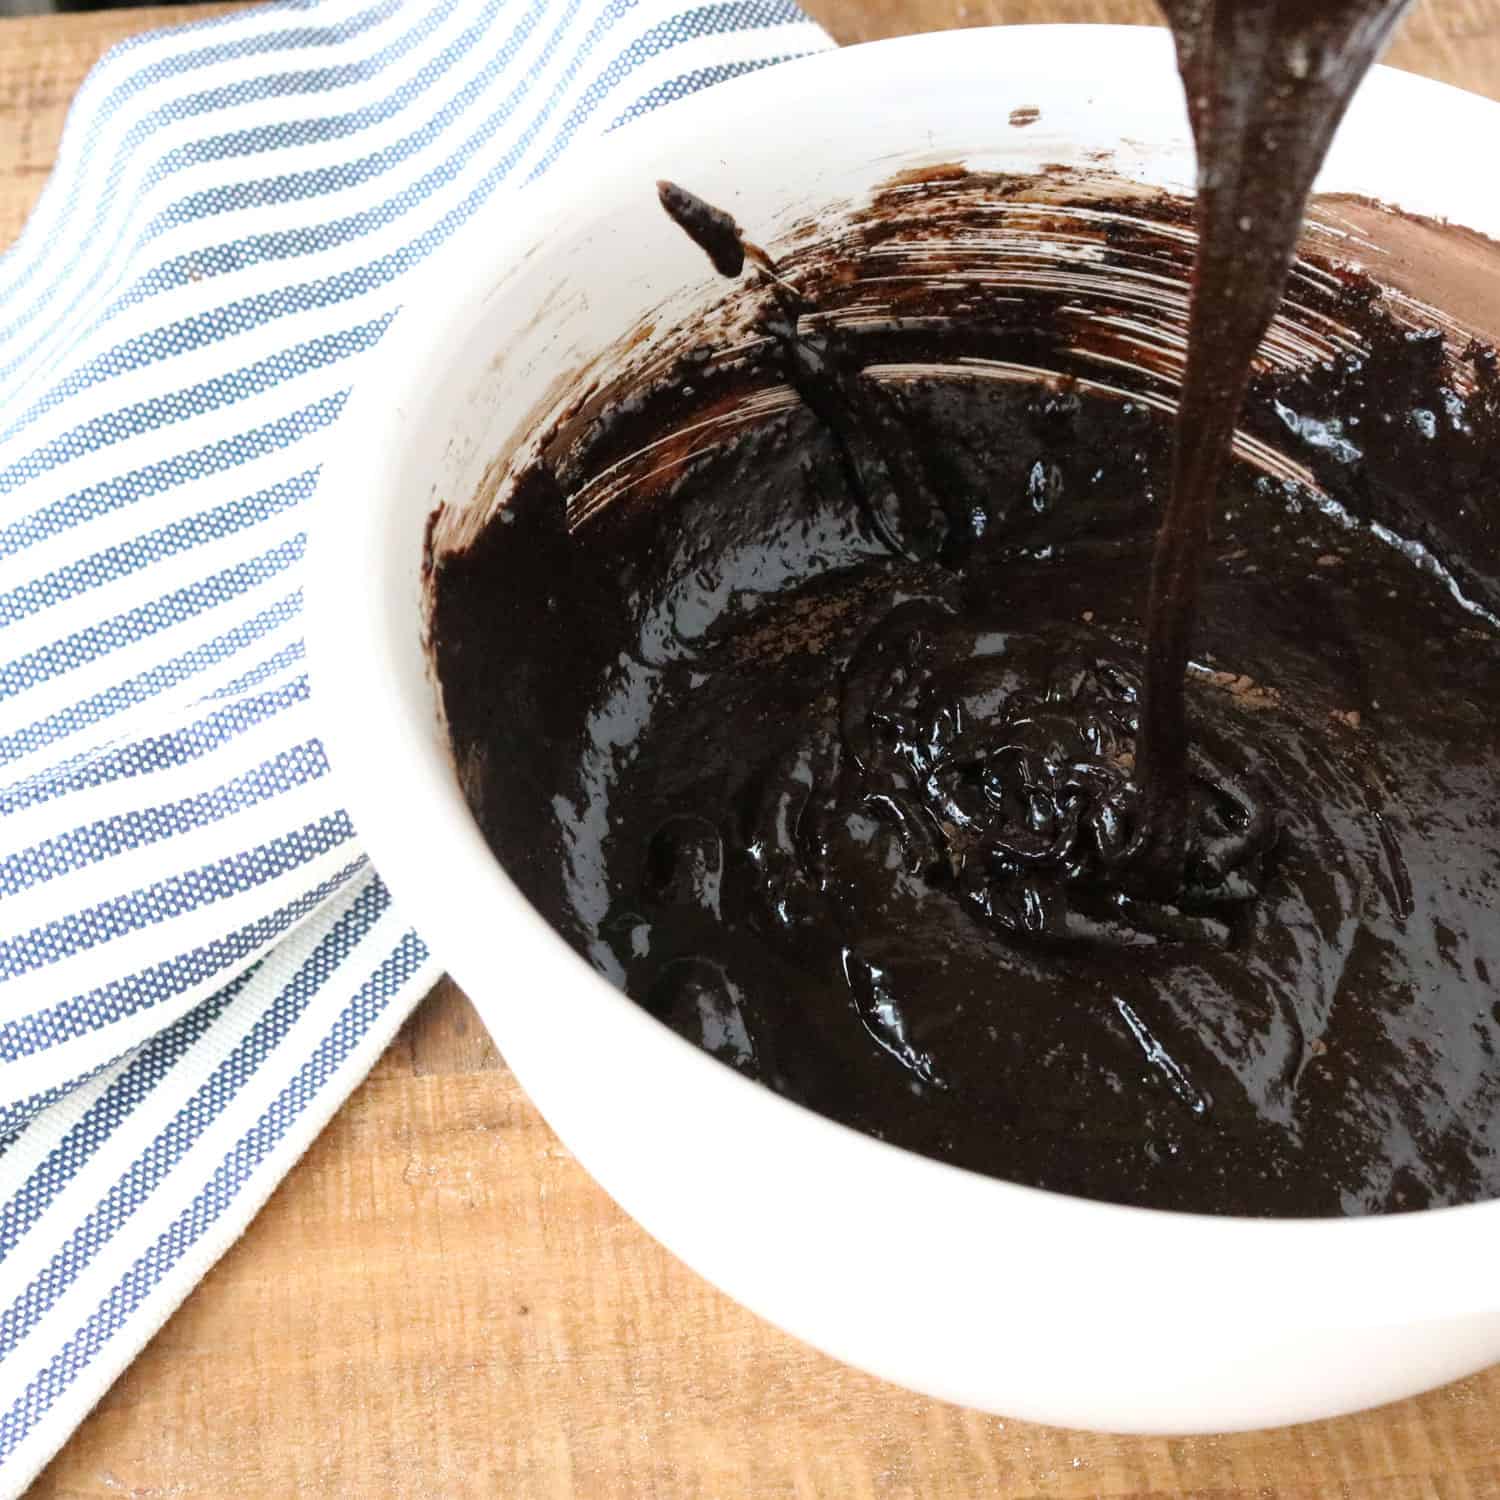 chocolate gluten free cake mixture pouring into a white bowl next to a blue and white striped kitchen towel